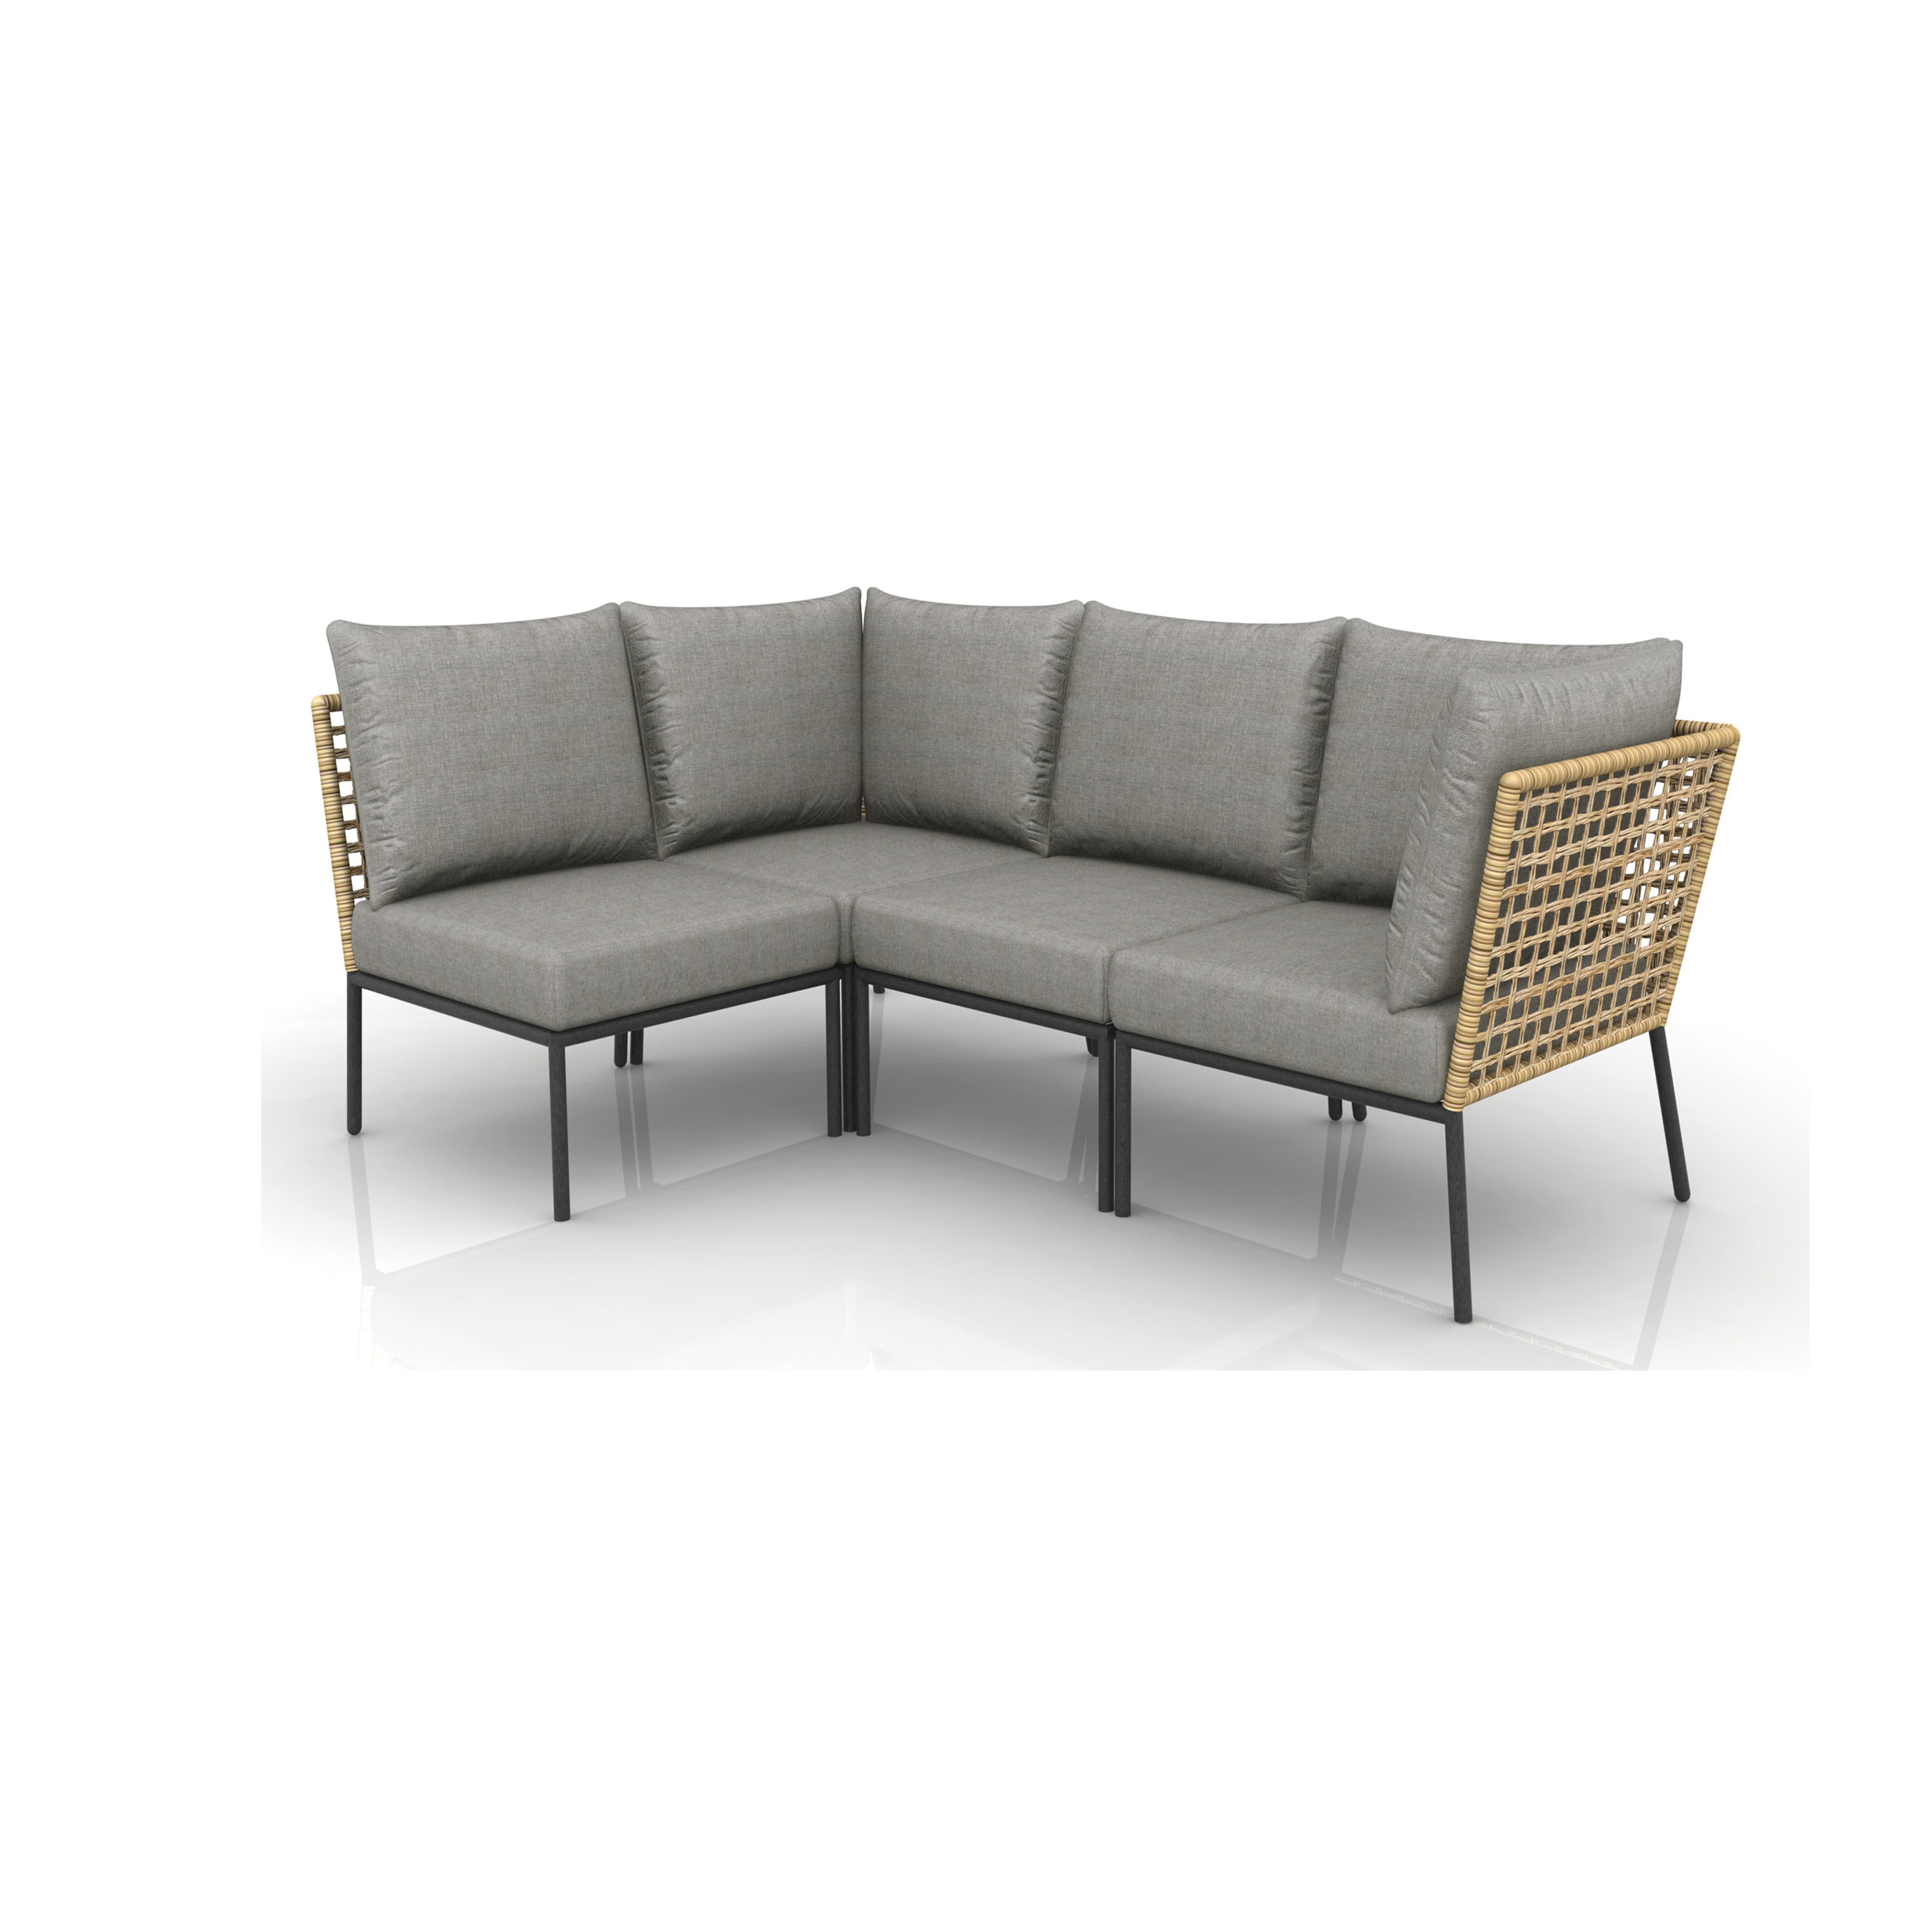 in the Wicker at Sets Clairmont Cushions Patio 21 4-Piece Patio Set Conversation Gray Origin Conversation department with